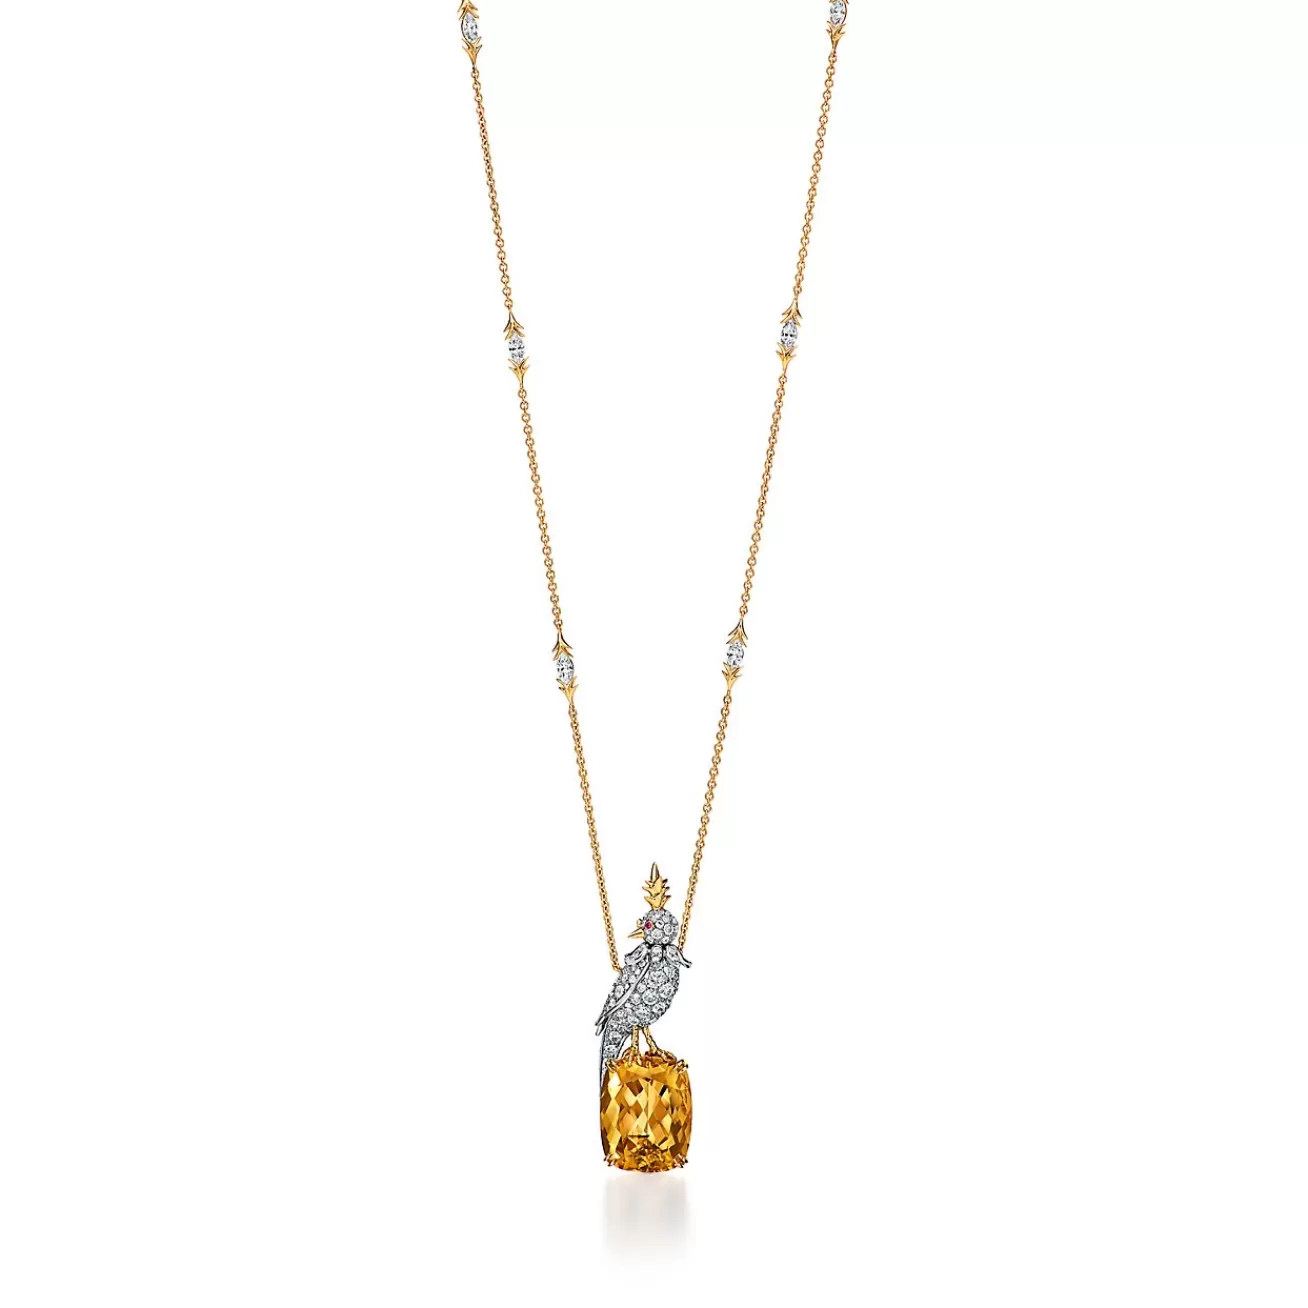 Tiffany & Co. Pendant in Yellow Gold and Platinum with a Citrine, Diamonds and Pink Sapphires | ^ Necklaces & Pendants | Gold Jewelry